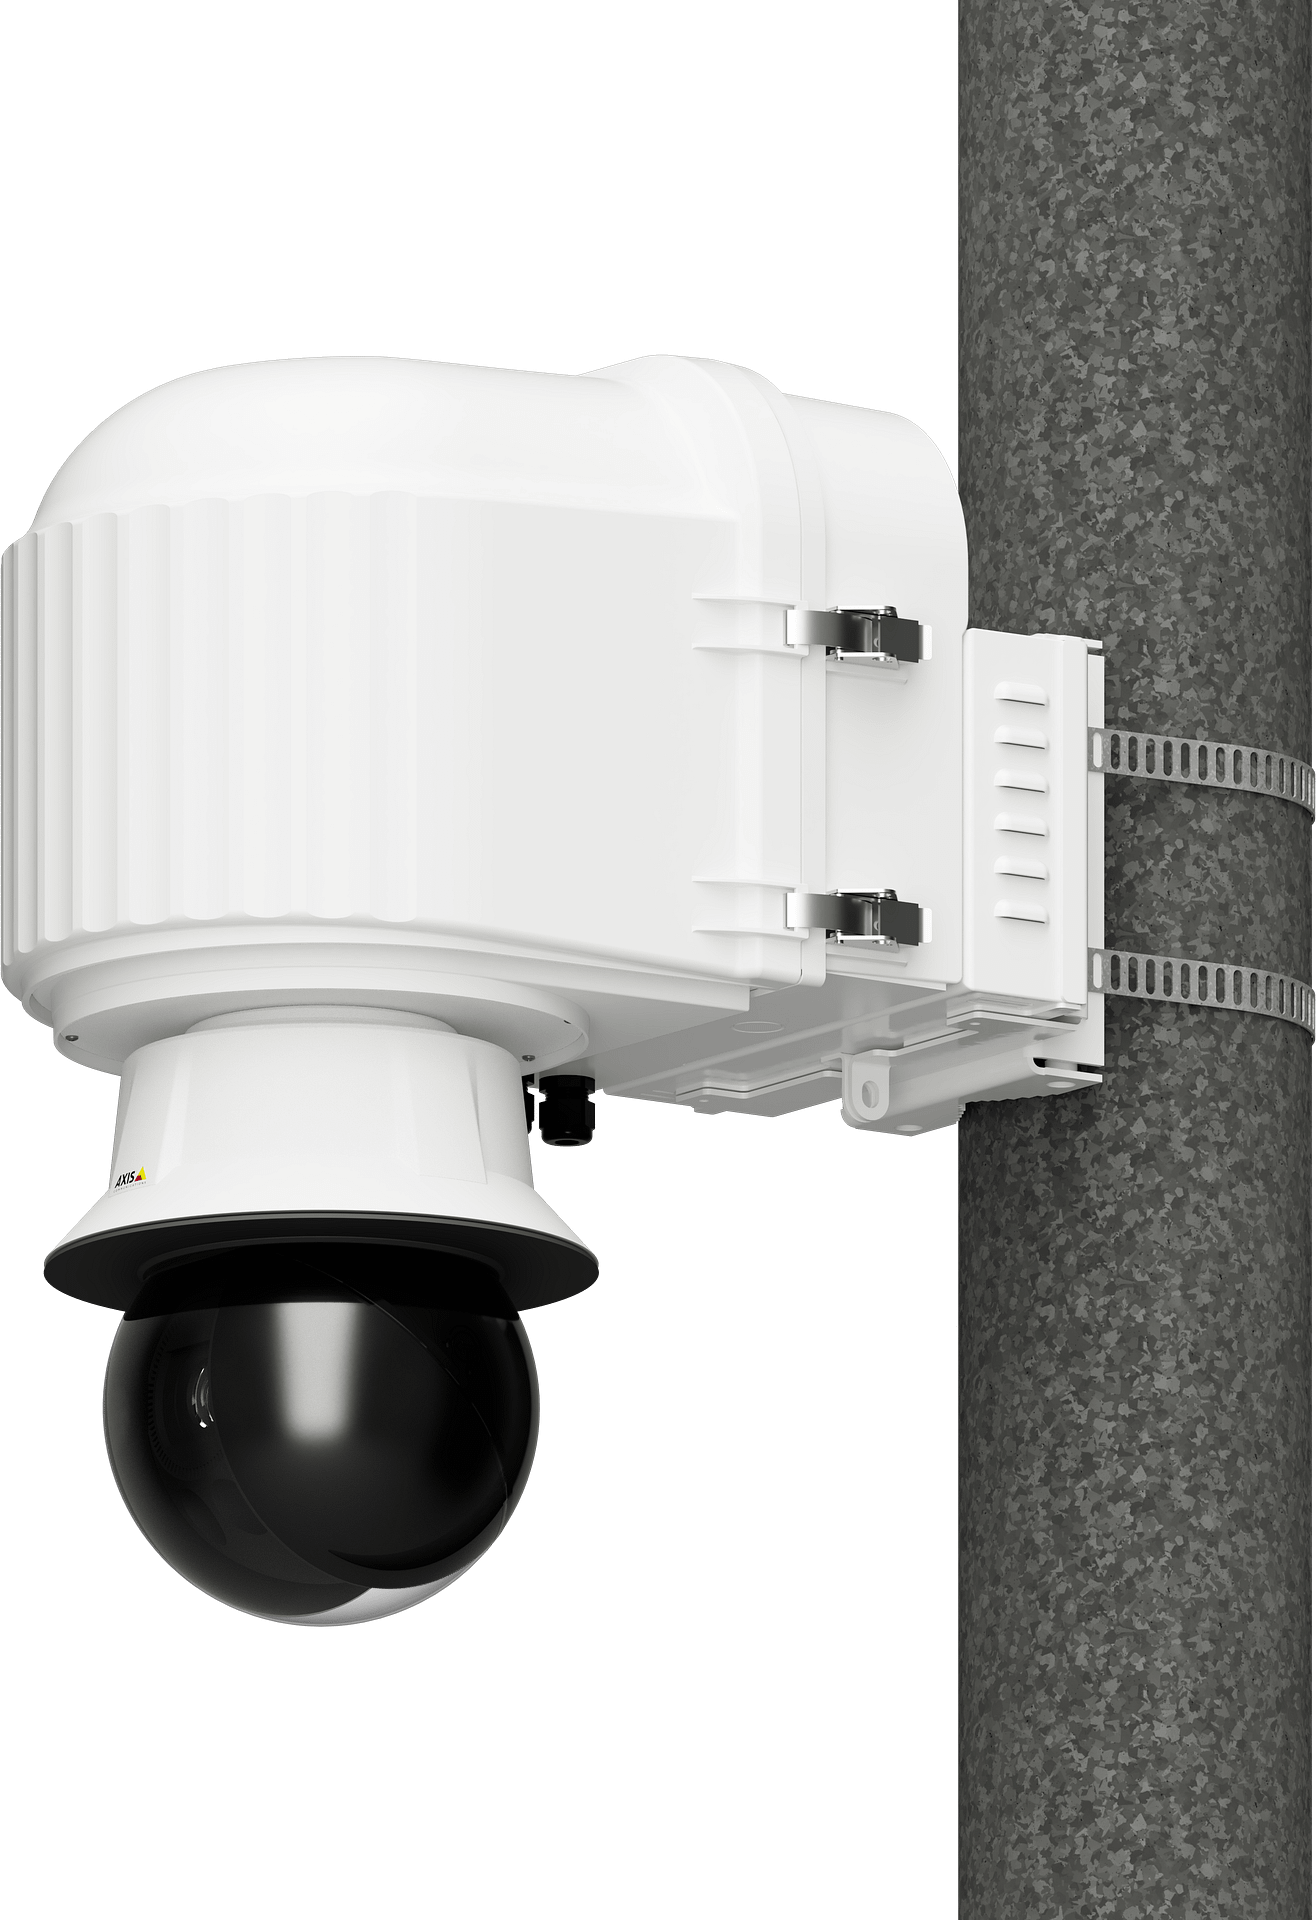 Axis Q6315-LE PTZ Network Camera Mounted to the X|Cold Self Cooling Enclosure System Mounted to a Pole 